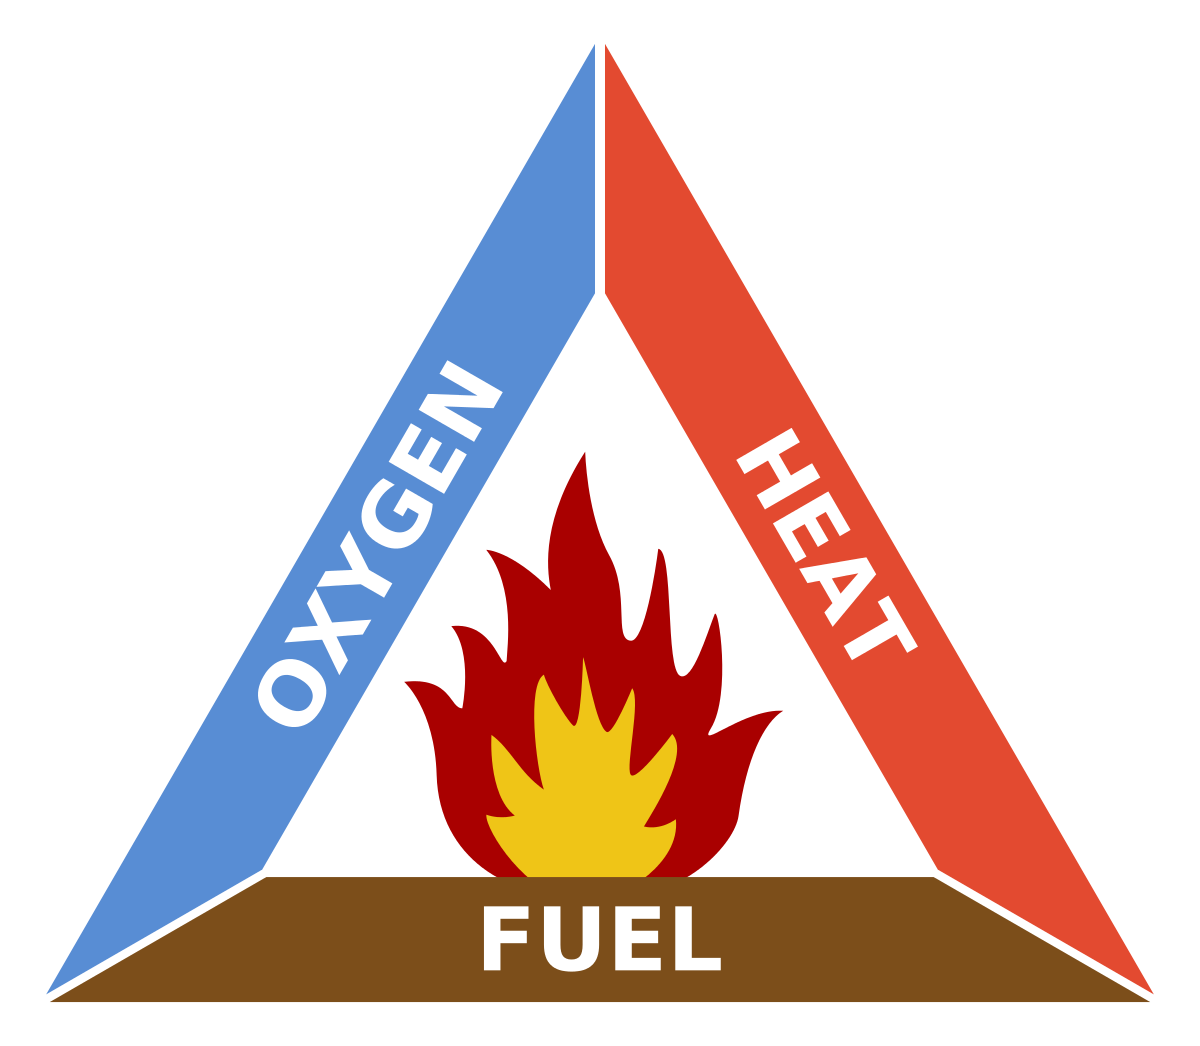 Illustration of fire triangle